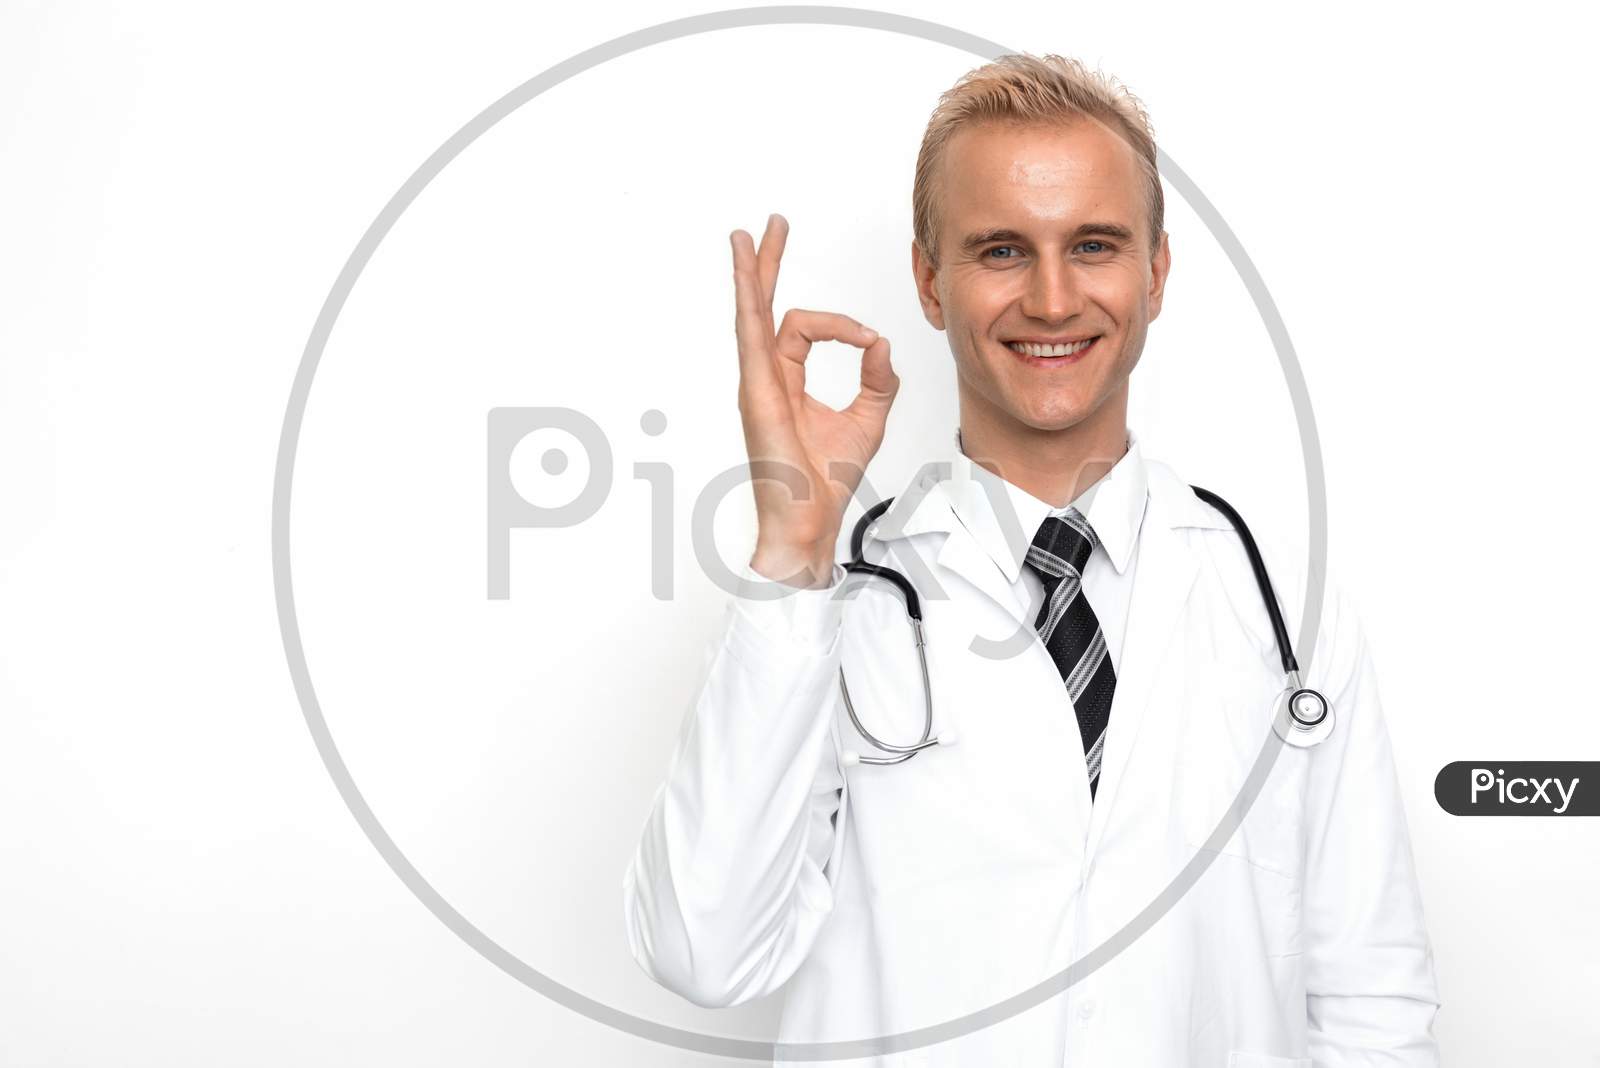 Doctor With Stethoscope Show Off Ok Or All Right Sign By His Hand On The White Background. Medical And Healthcare Concept. Hospital Theme